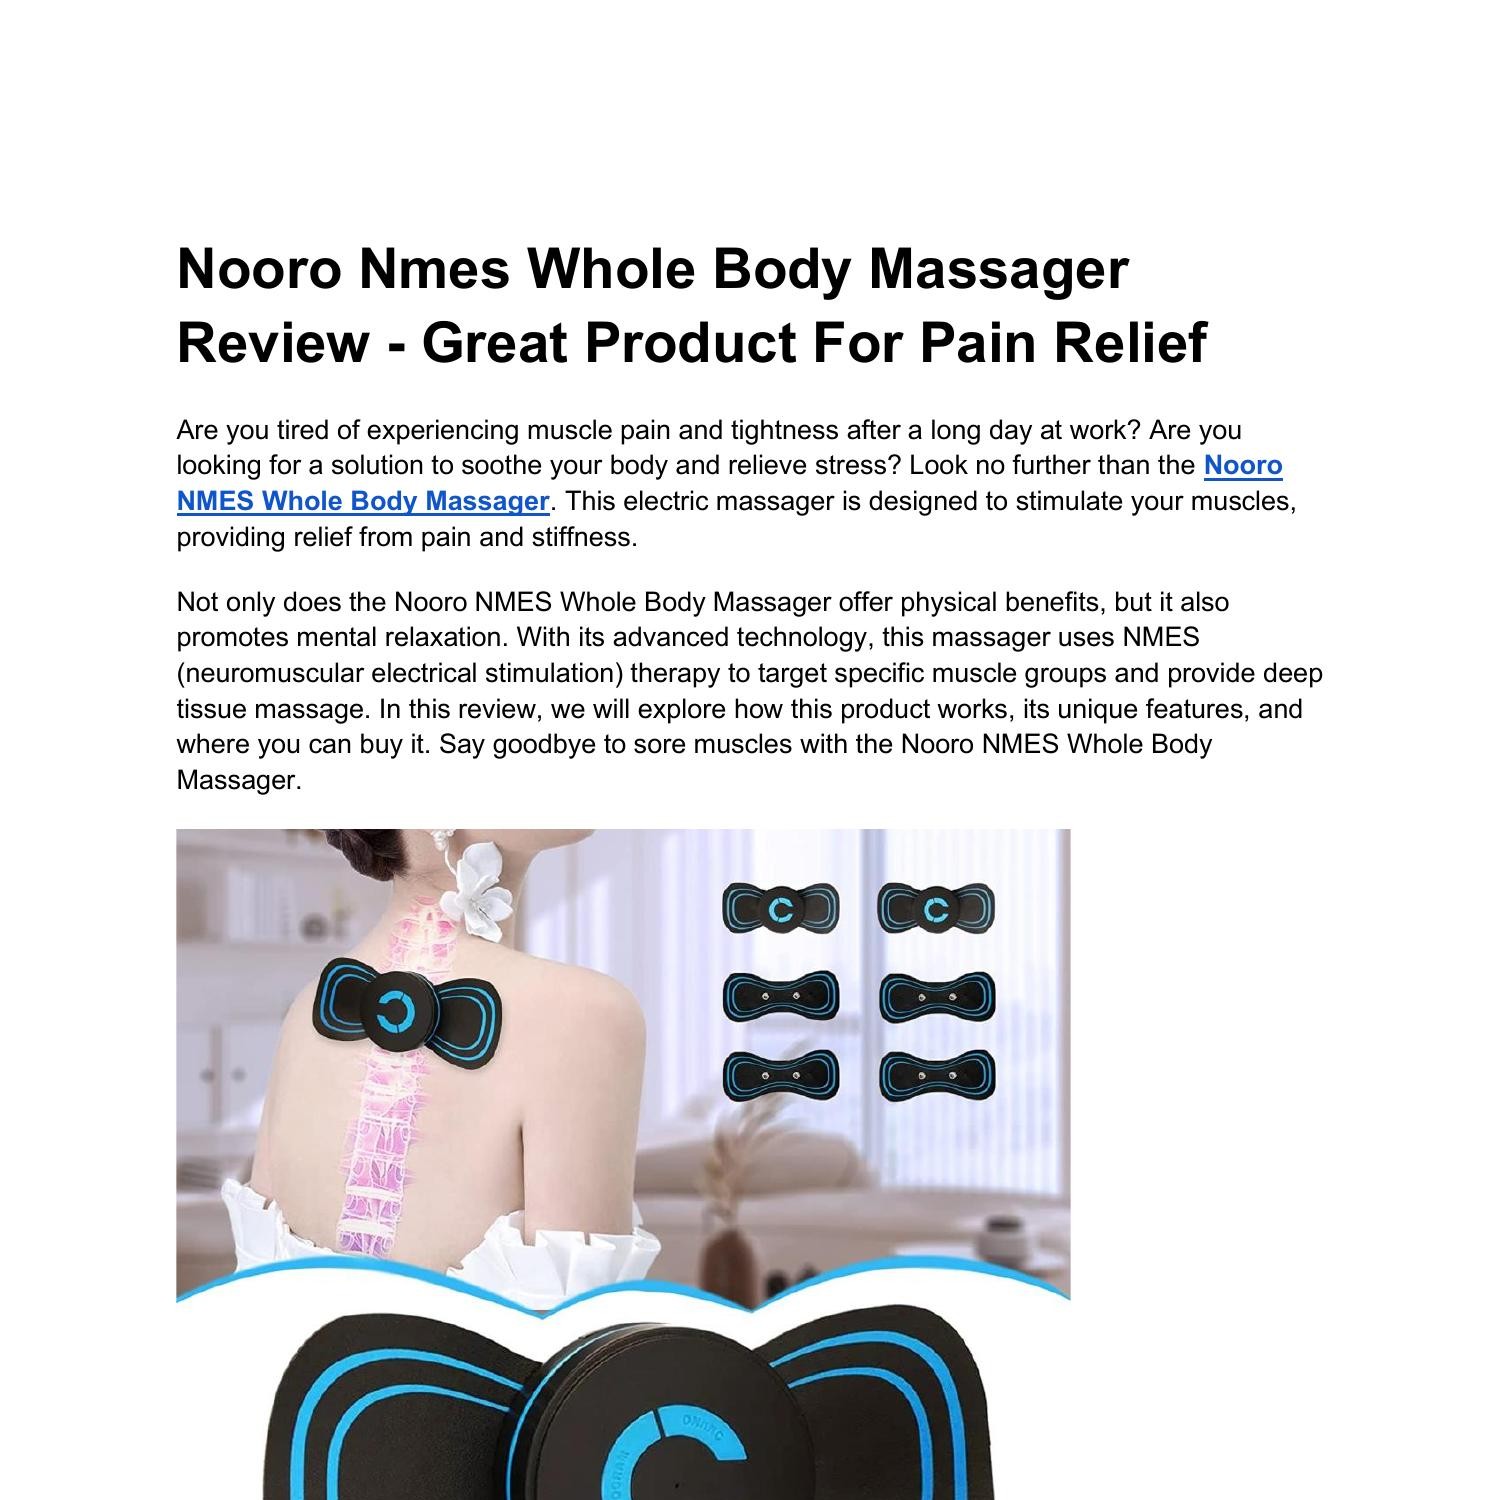 https://www.docdroid.com/thumbnail/Ej8mtIG/1500,1500/nooro-nmes-whole-body-massager-review-great-product-for-pain-relief-docx.jpg